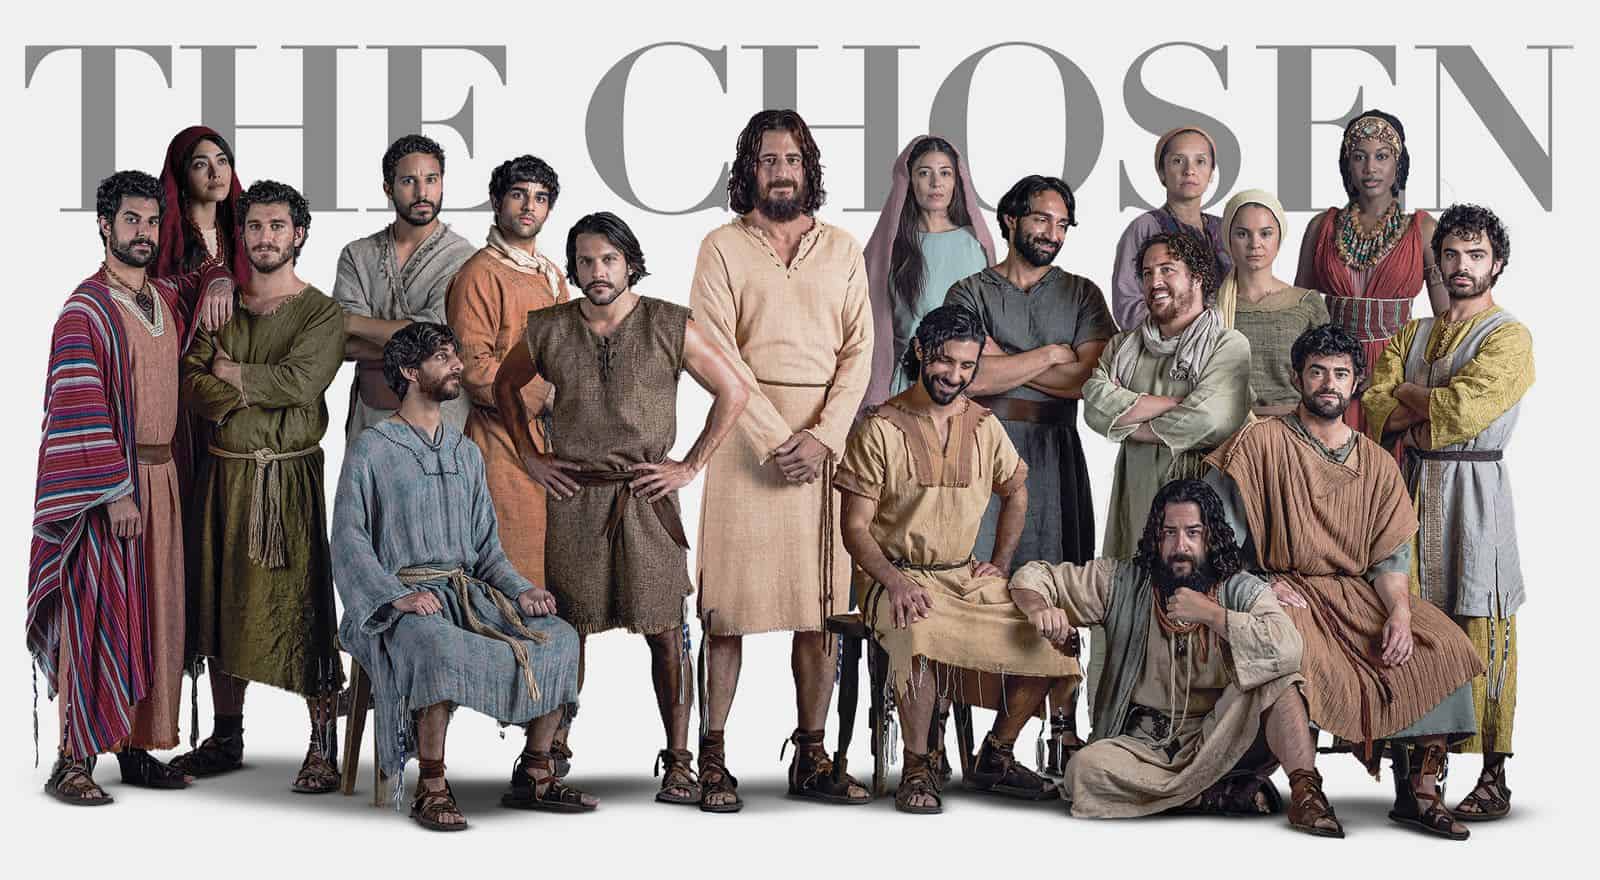 Cast if the widely popular and criticslly acclaimed show "The Chosen"